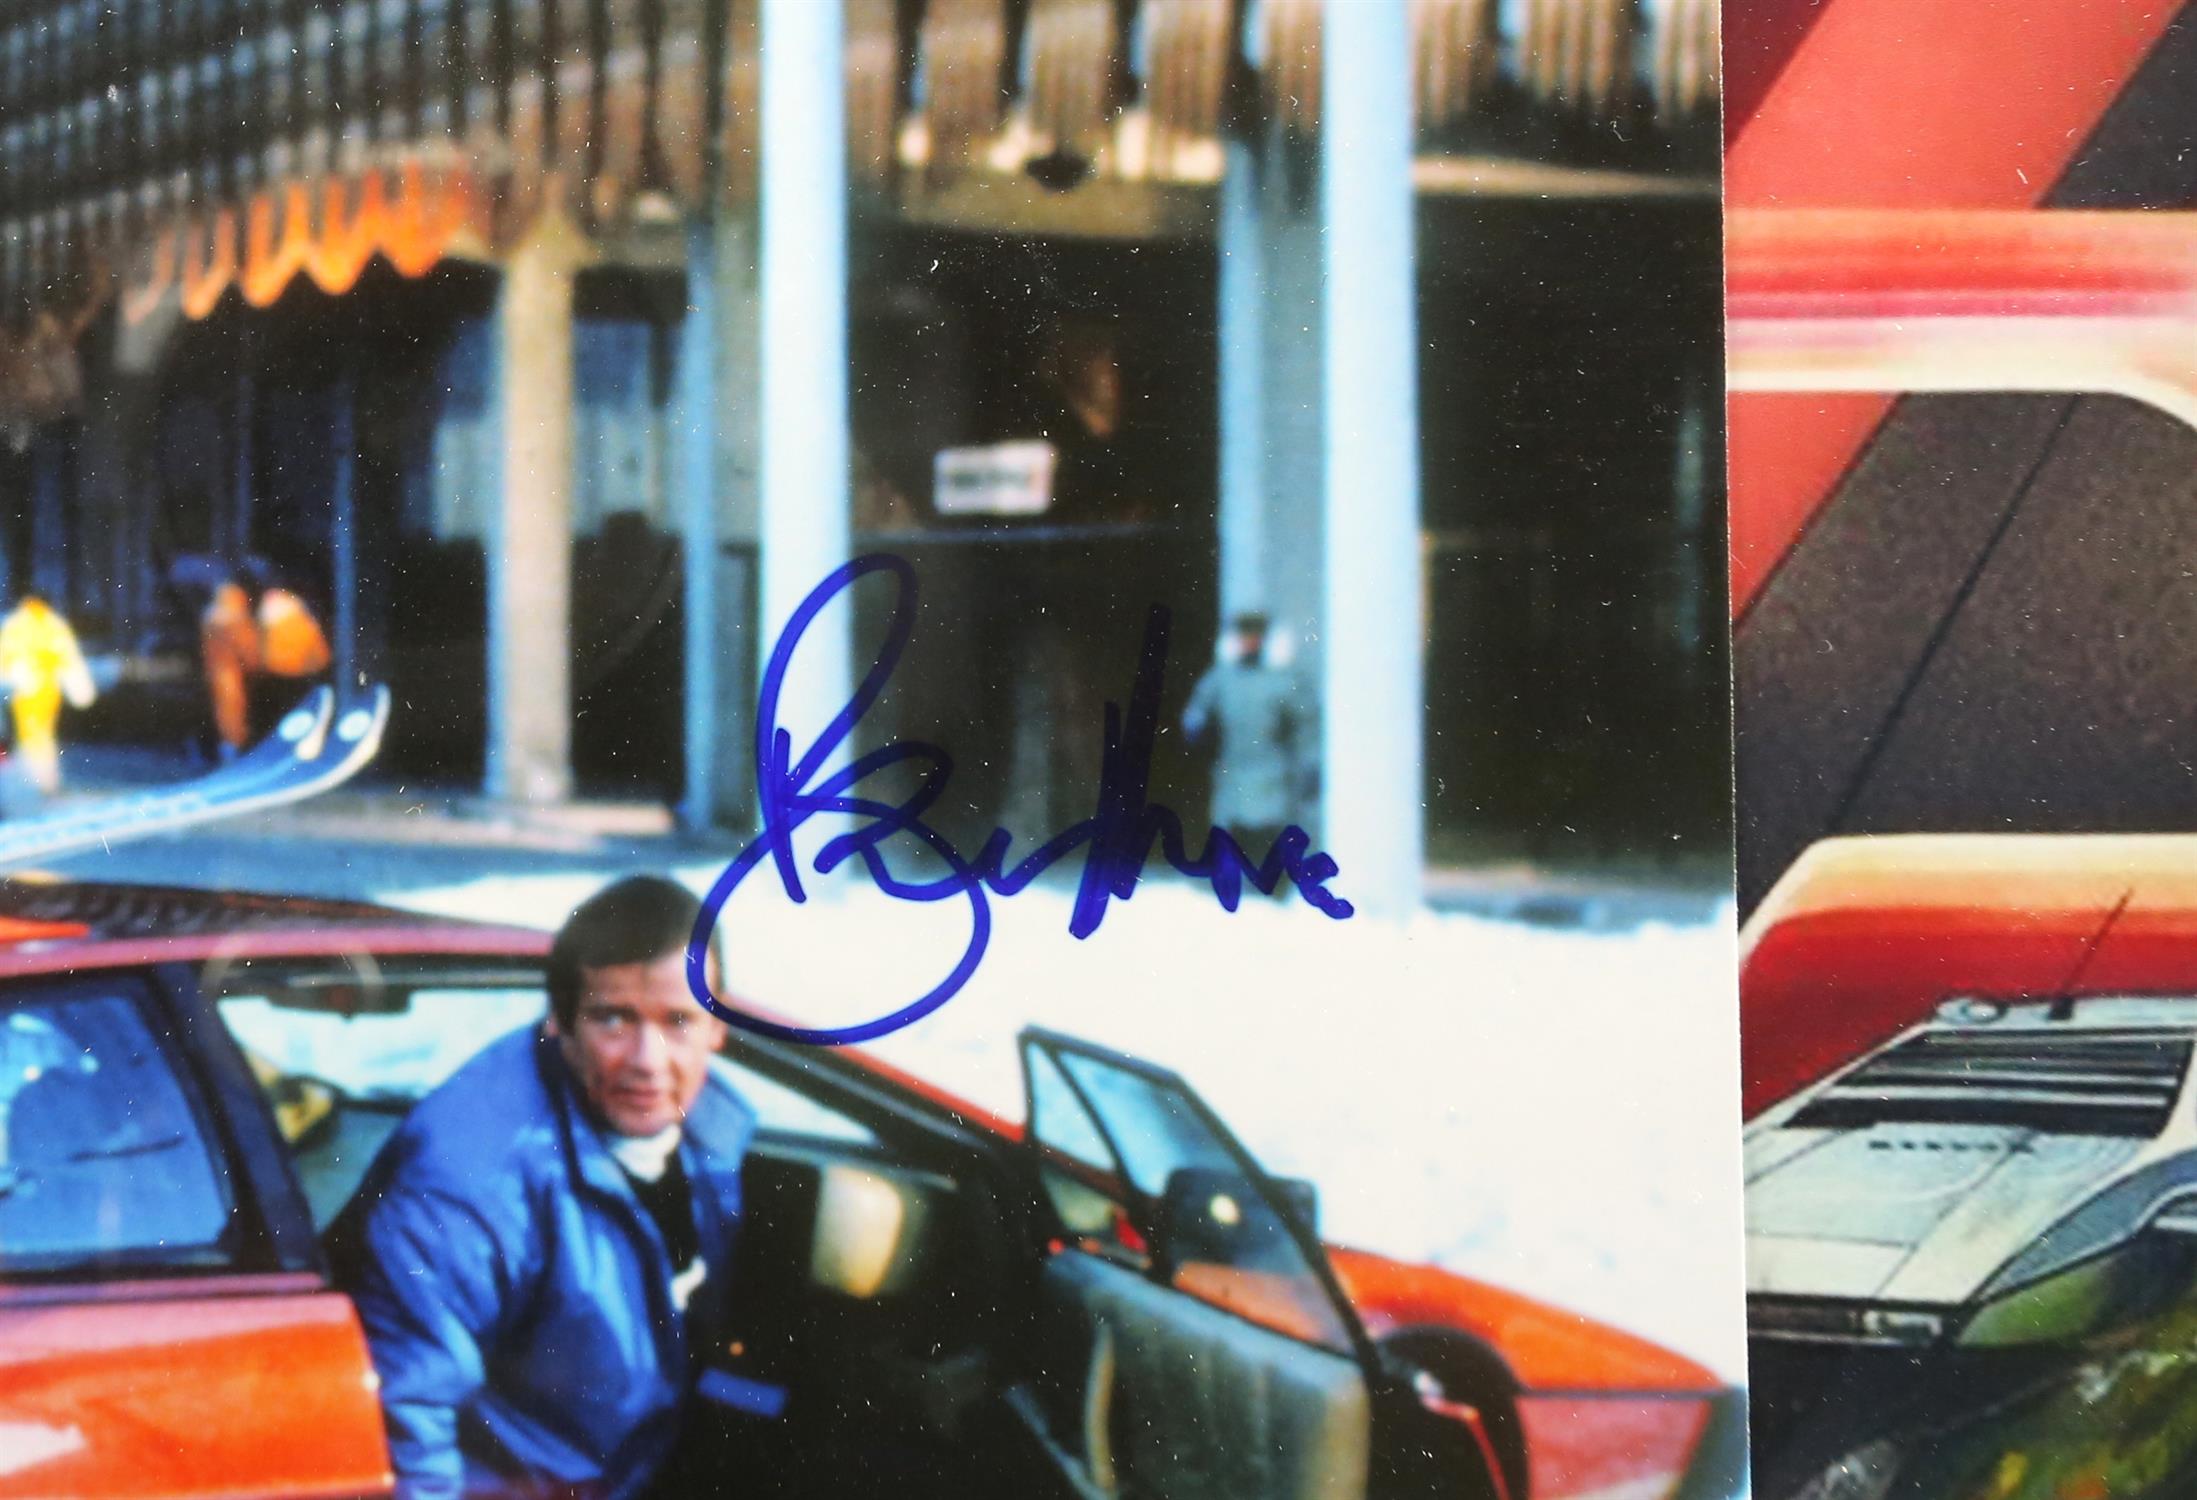 James Bond - Roger Moore signed photograph, framed, 13 x 9 1/2 inches overall. - Image 2 of 2